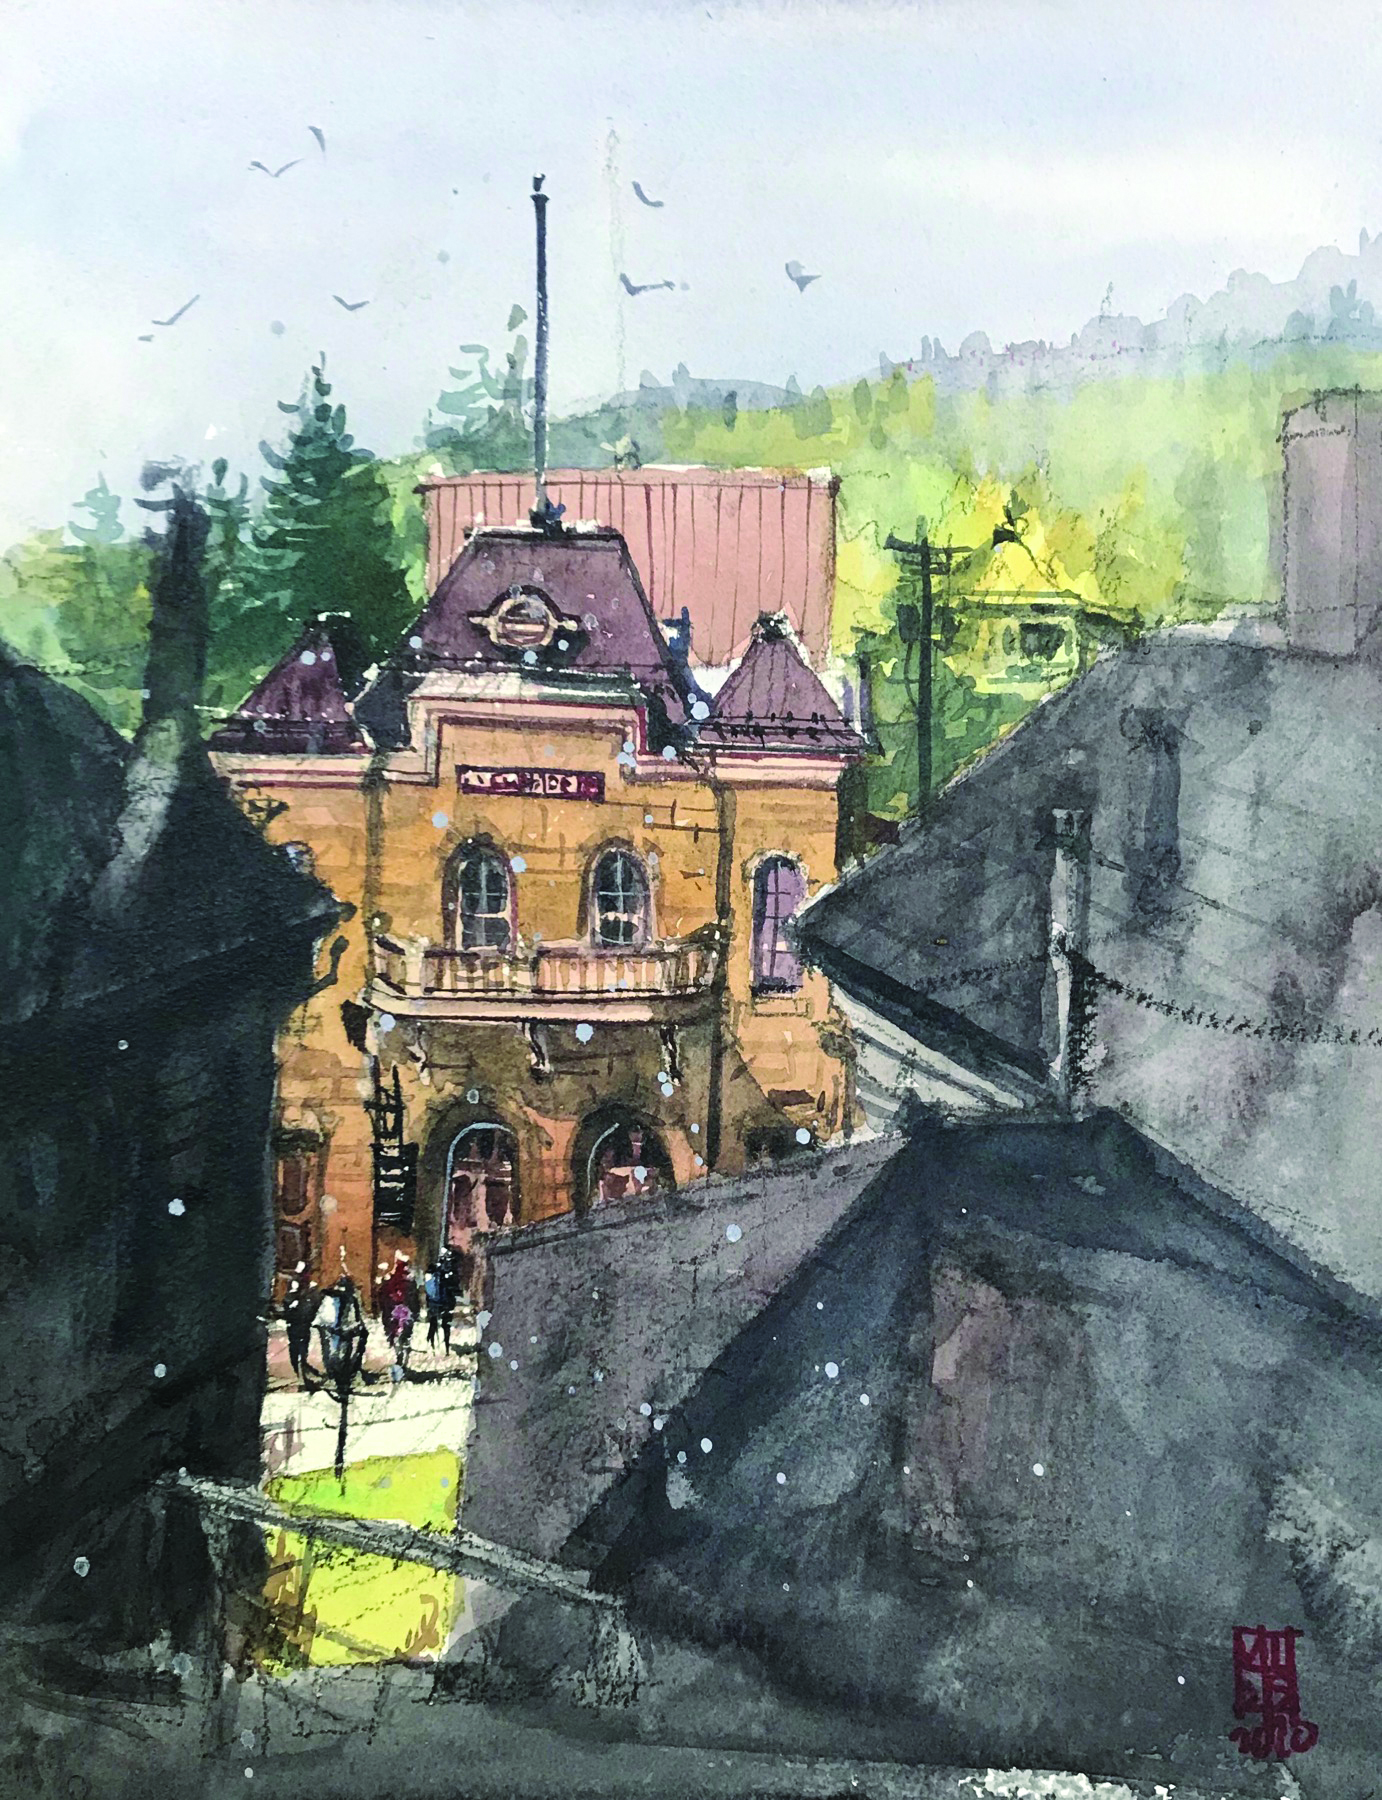 Richie N. Vios, "Opera House," 2020, watercolor, 14 x 11 in., Private collection, Plein air, 2020 Central City Plein Air Festival (Quick Draw First Place)